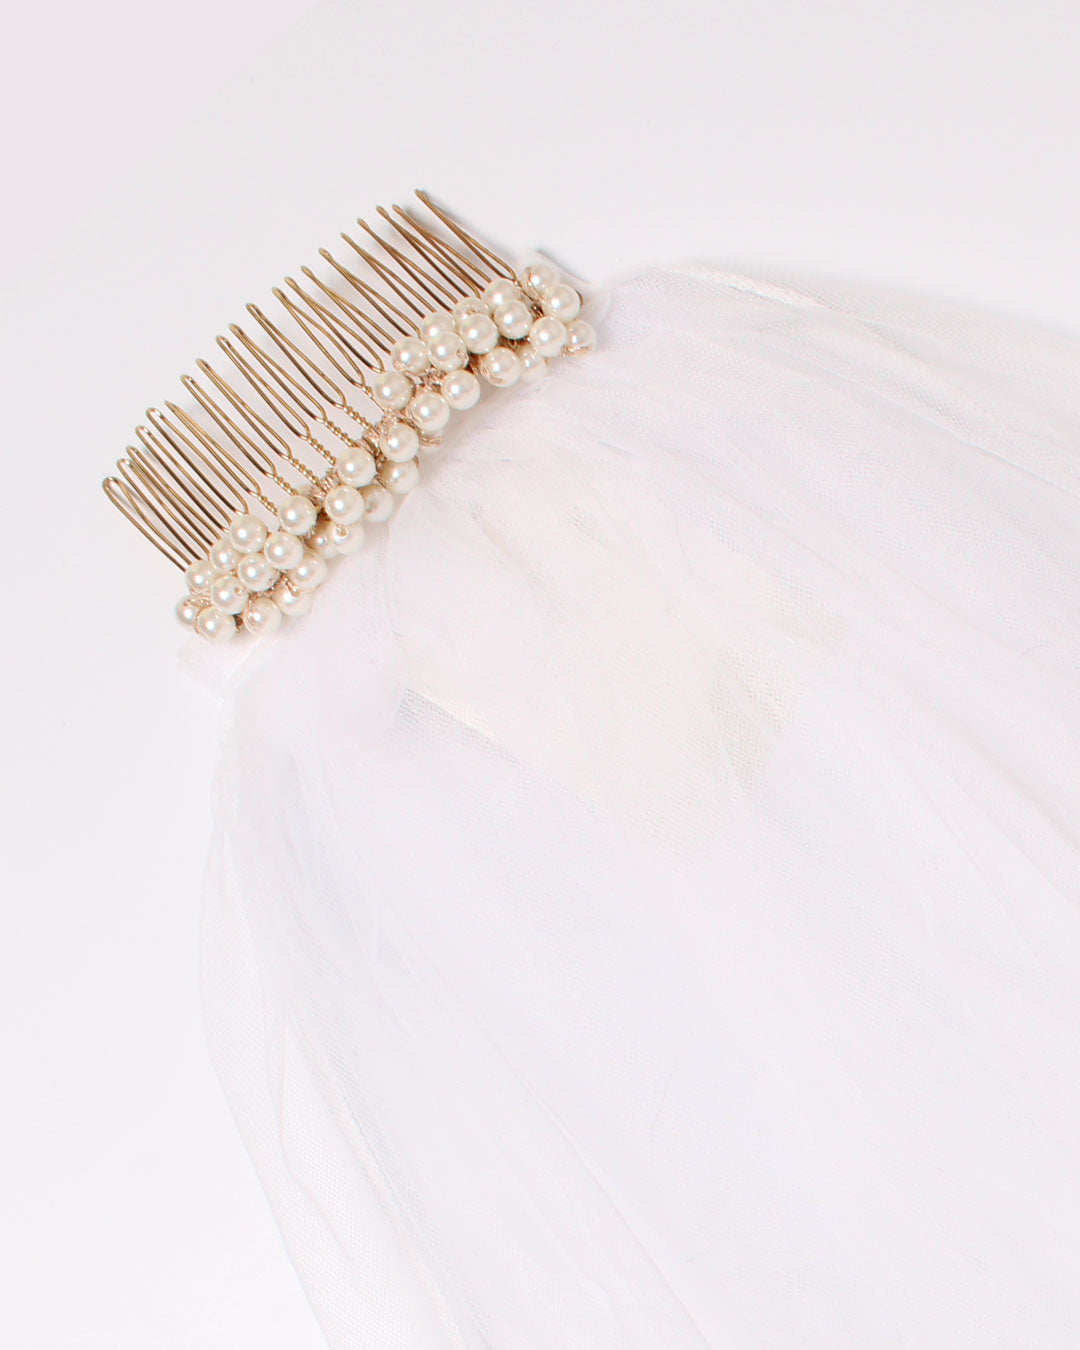 BANDED Hair Accessories. Nashville Bridal Collection. Bridal Veil with attached comb